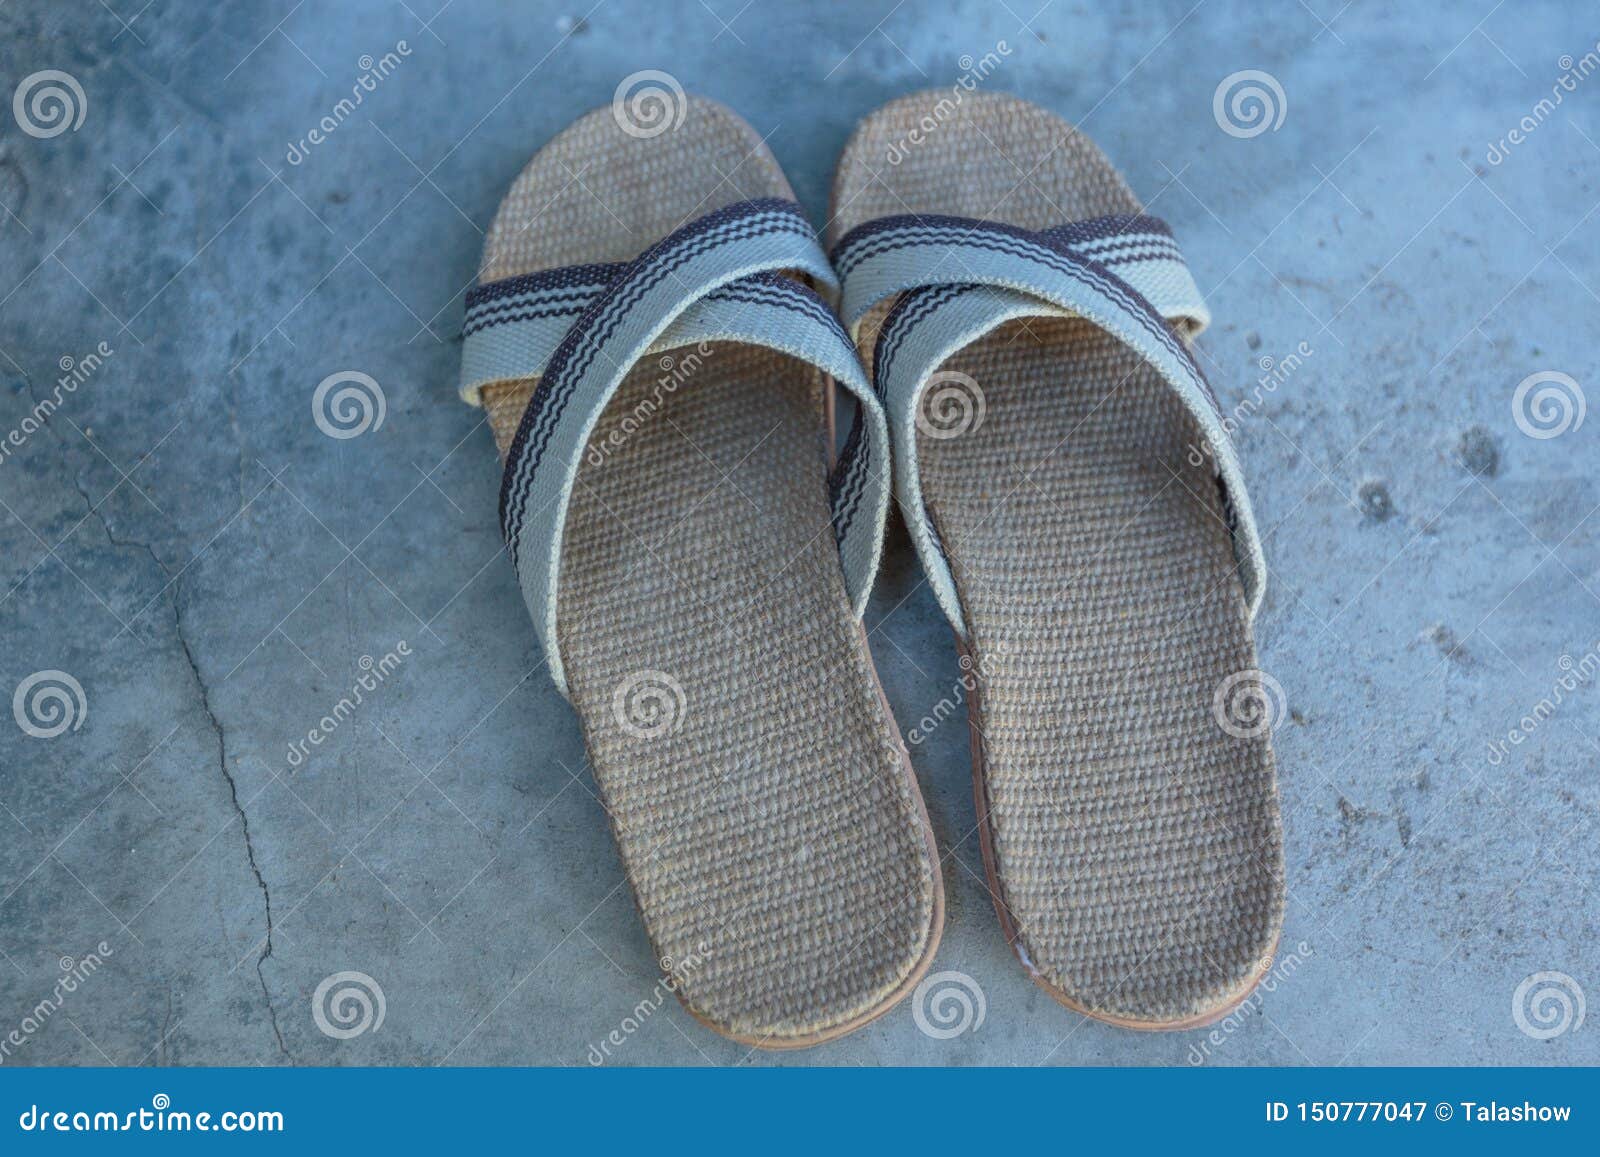 Pair of Slippers on a Concrete Surface Stock Image - Image of weekend ...